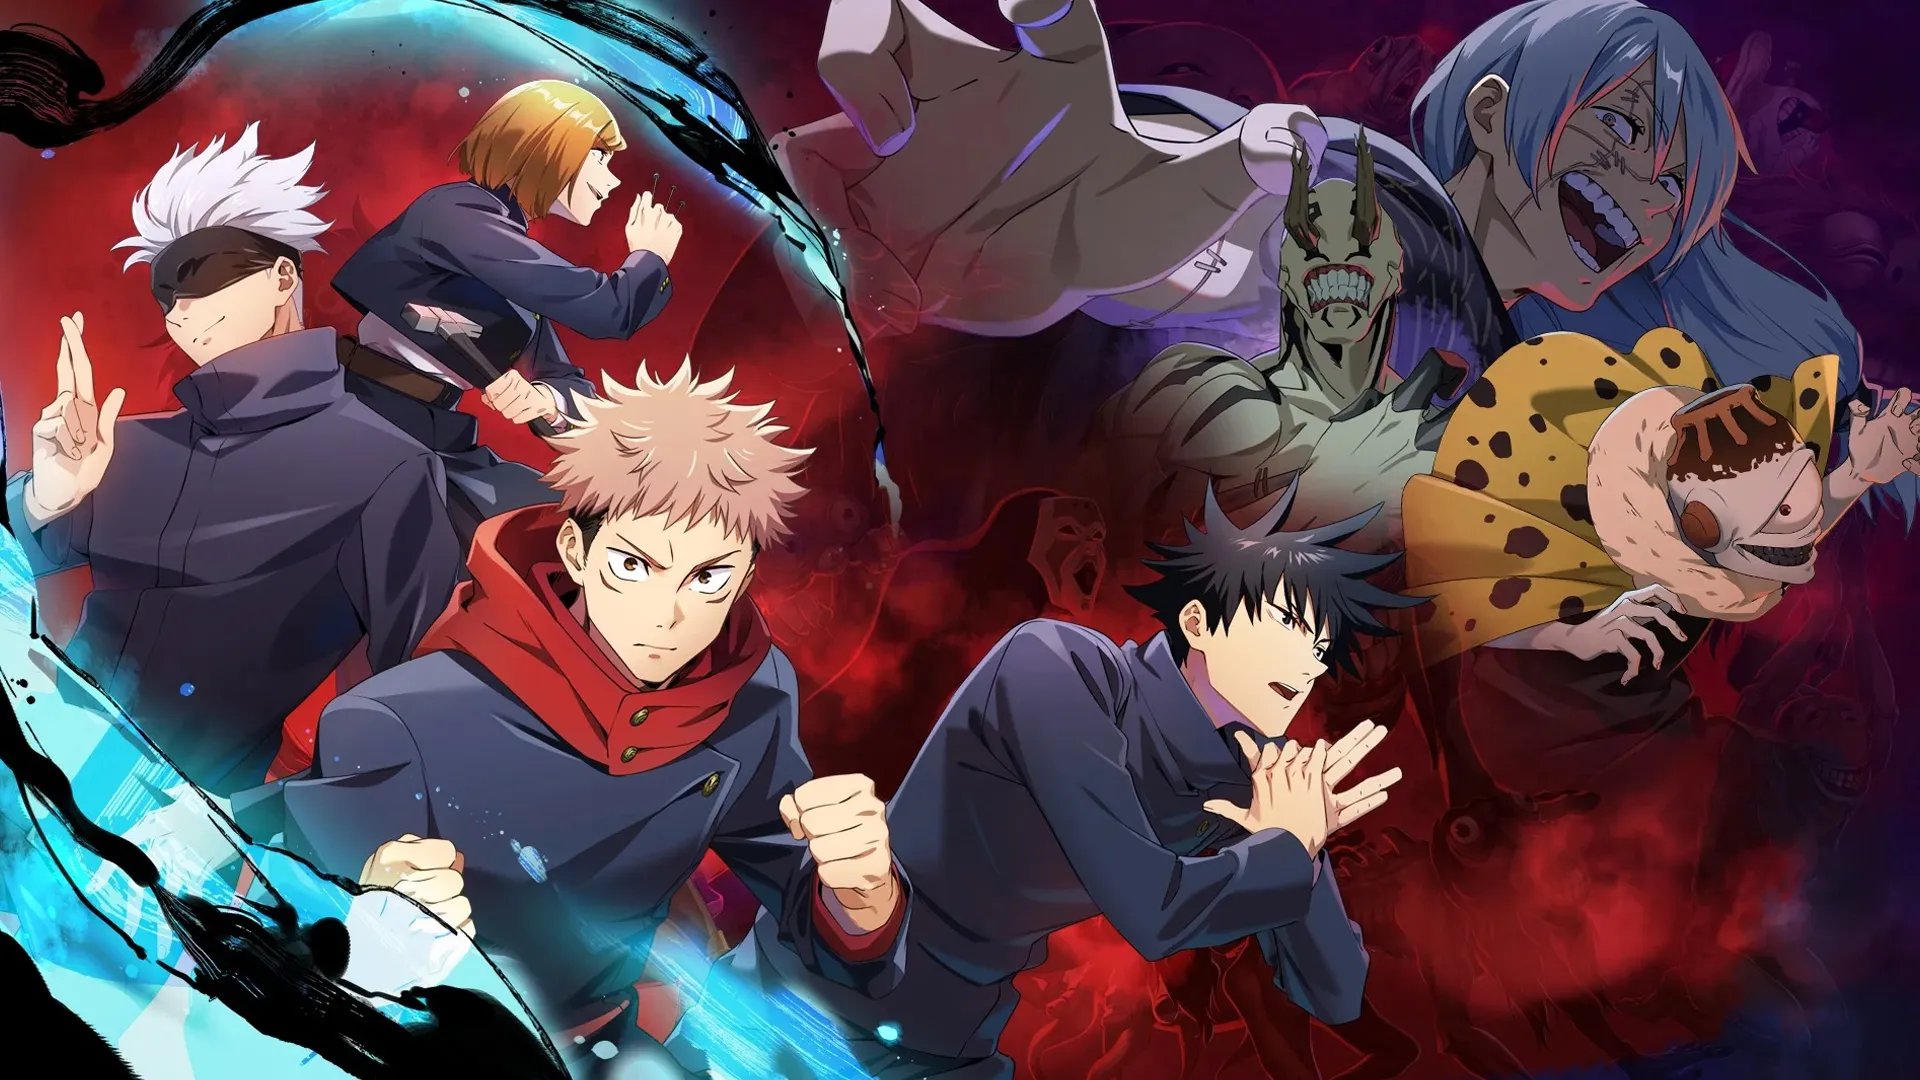 The Strongest 'Jujutsu Kaisen' Characters, Ranked